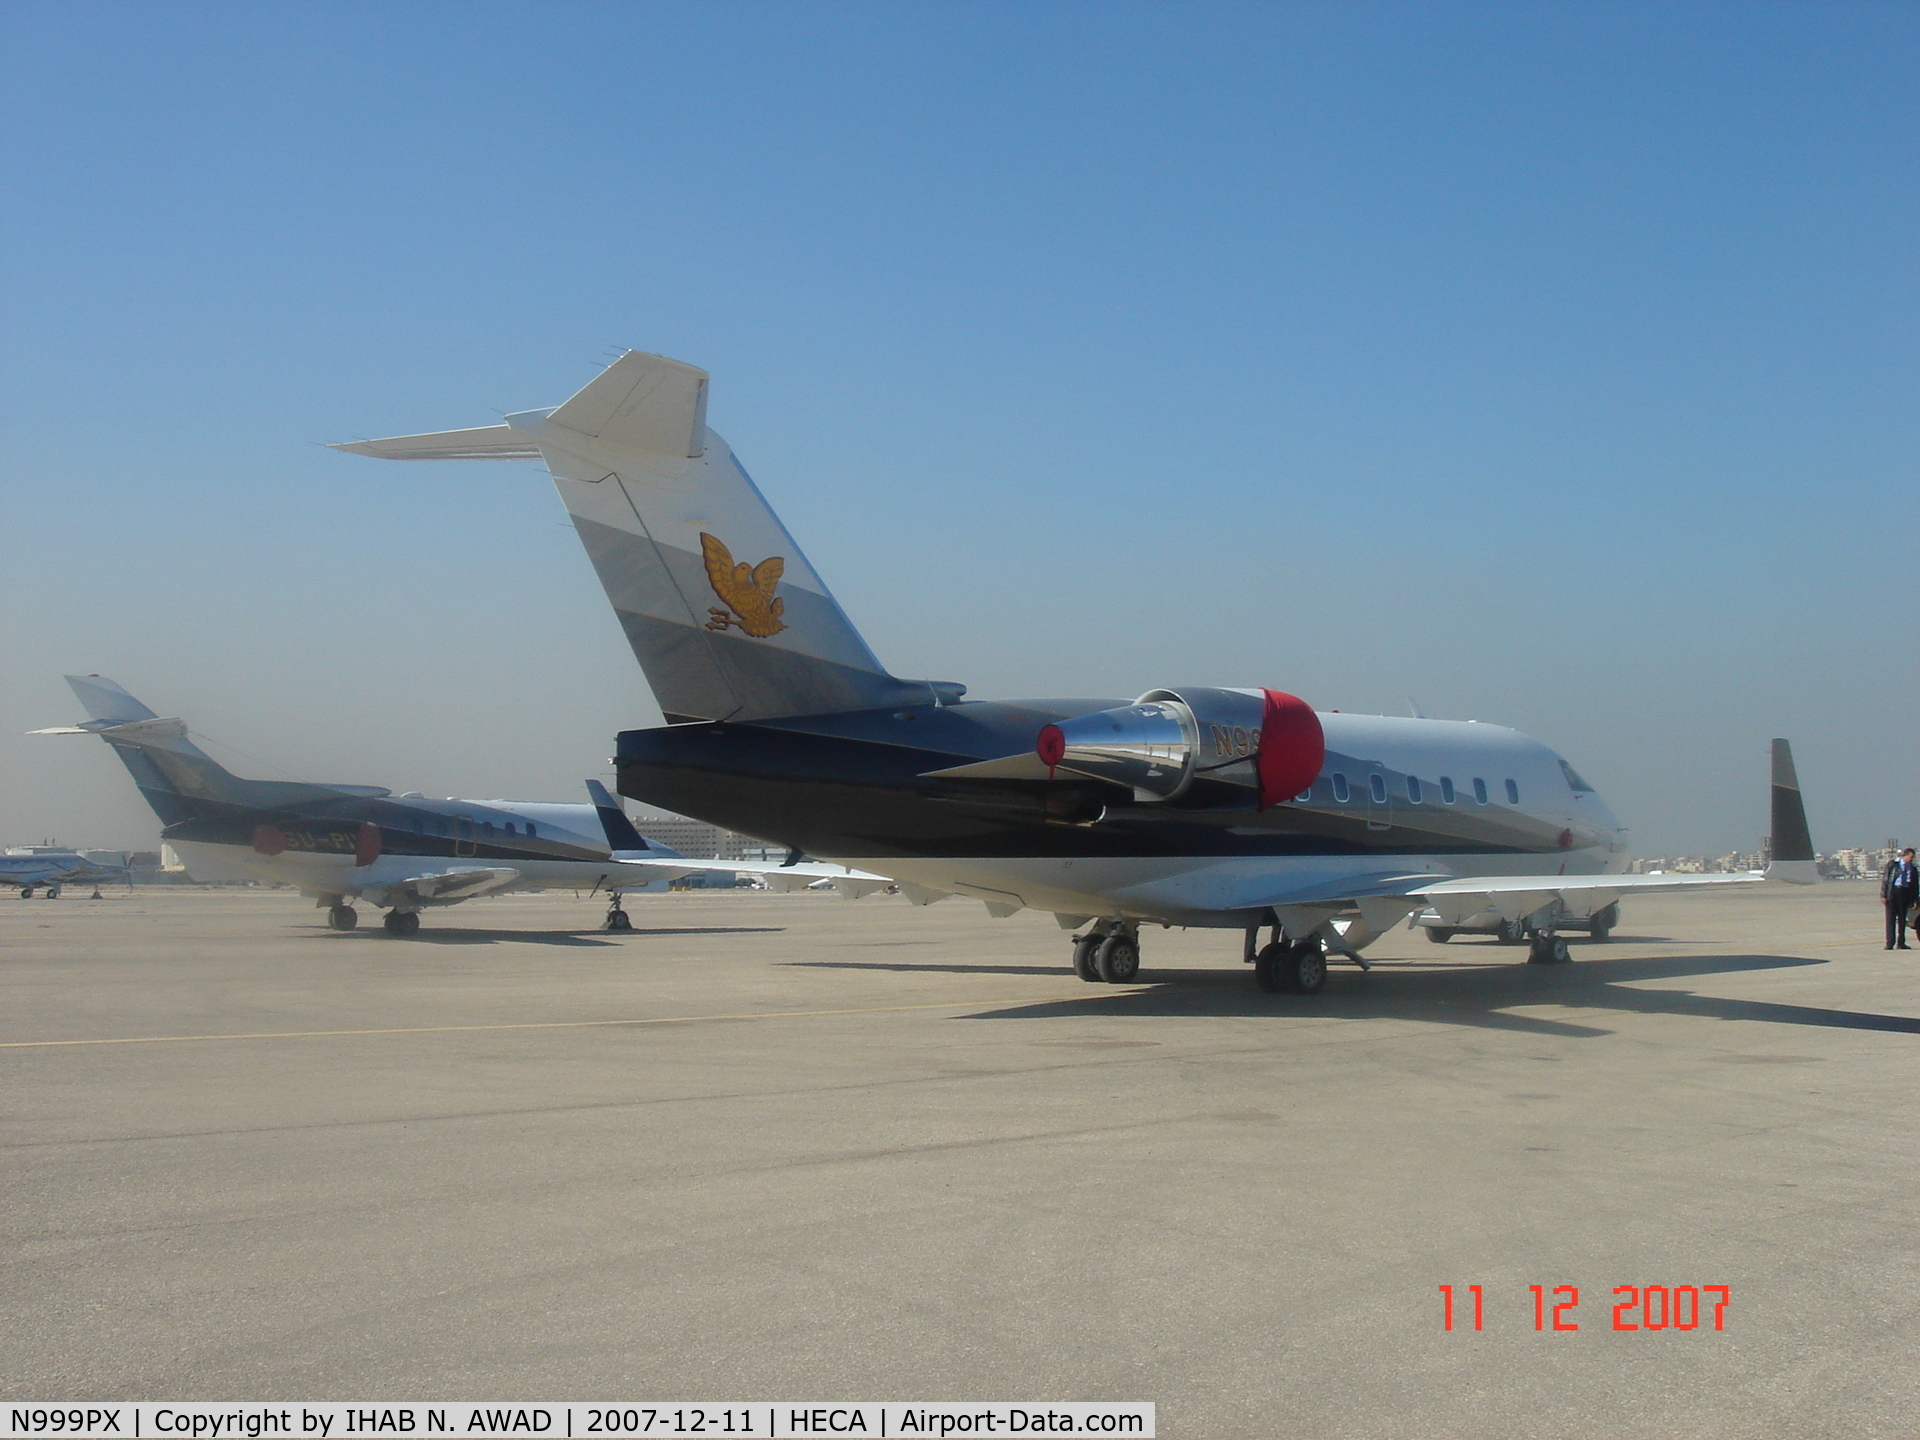 N999PX, 1998 Bombardier Challenger 604 (CL-600-2B16) C/N 5387, WITH ITS HS-125-700 BABY SISTER SU-PIX (RARE PICTURE)